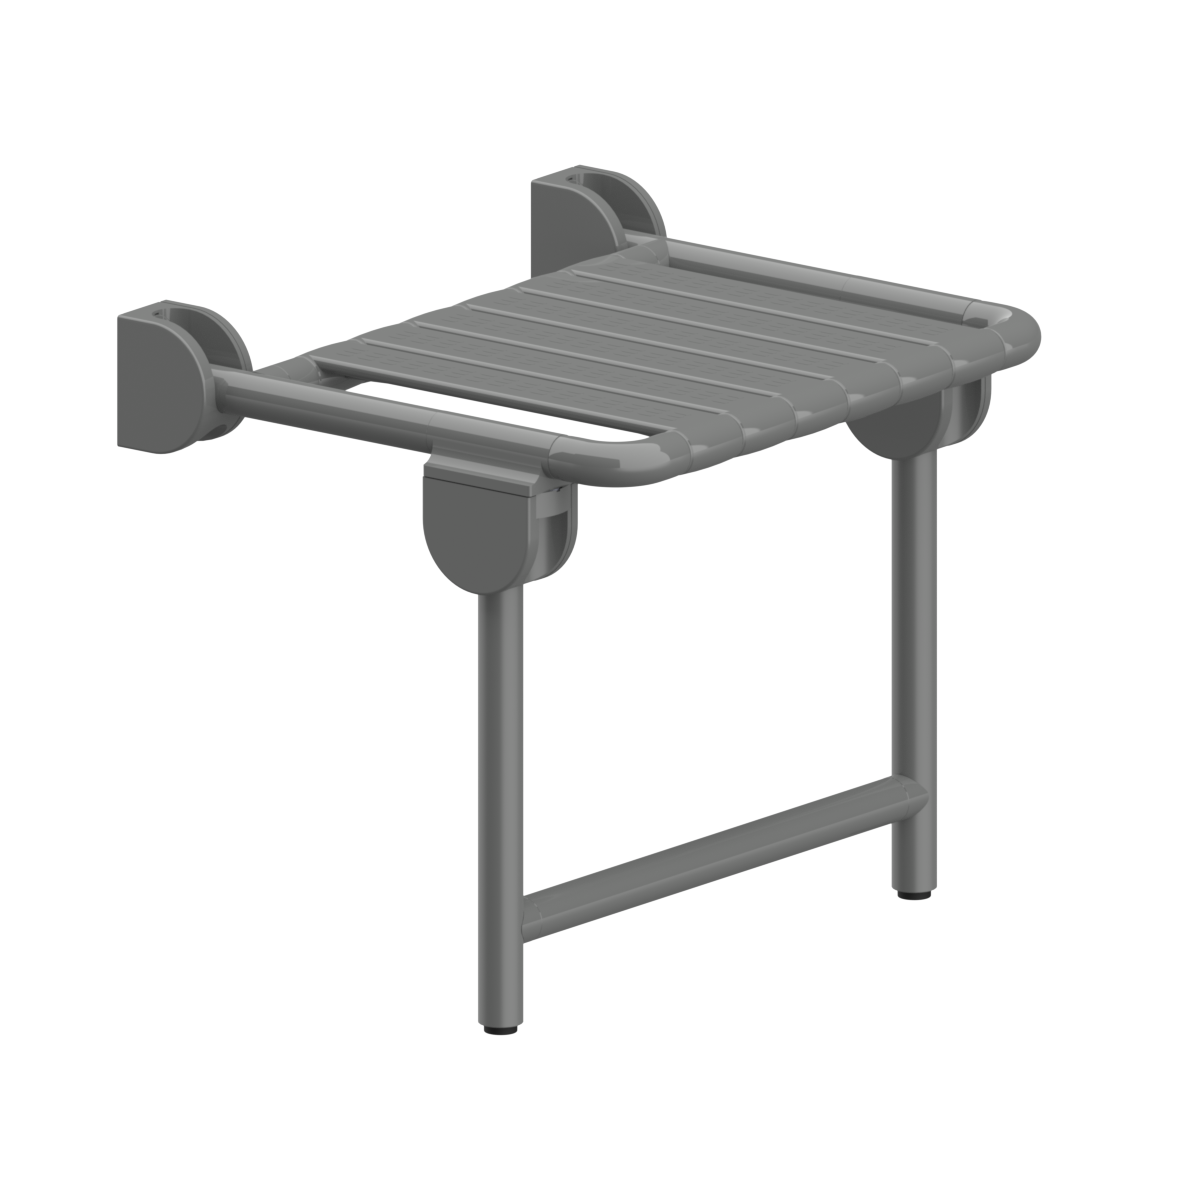 Special Care Adipositas Lift-up shower seat, with support feet, 534 x 467 x 498 mm, Dark grey